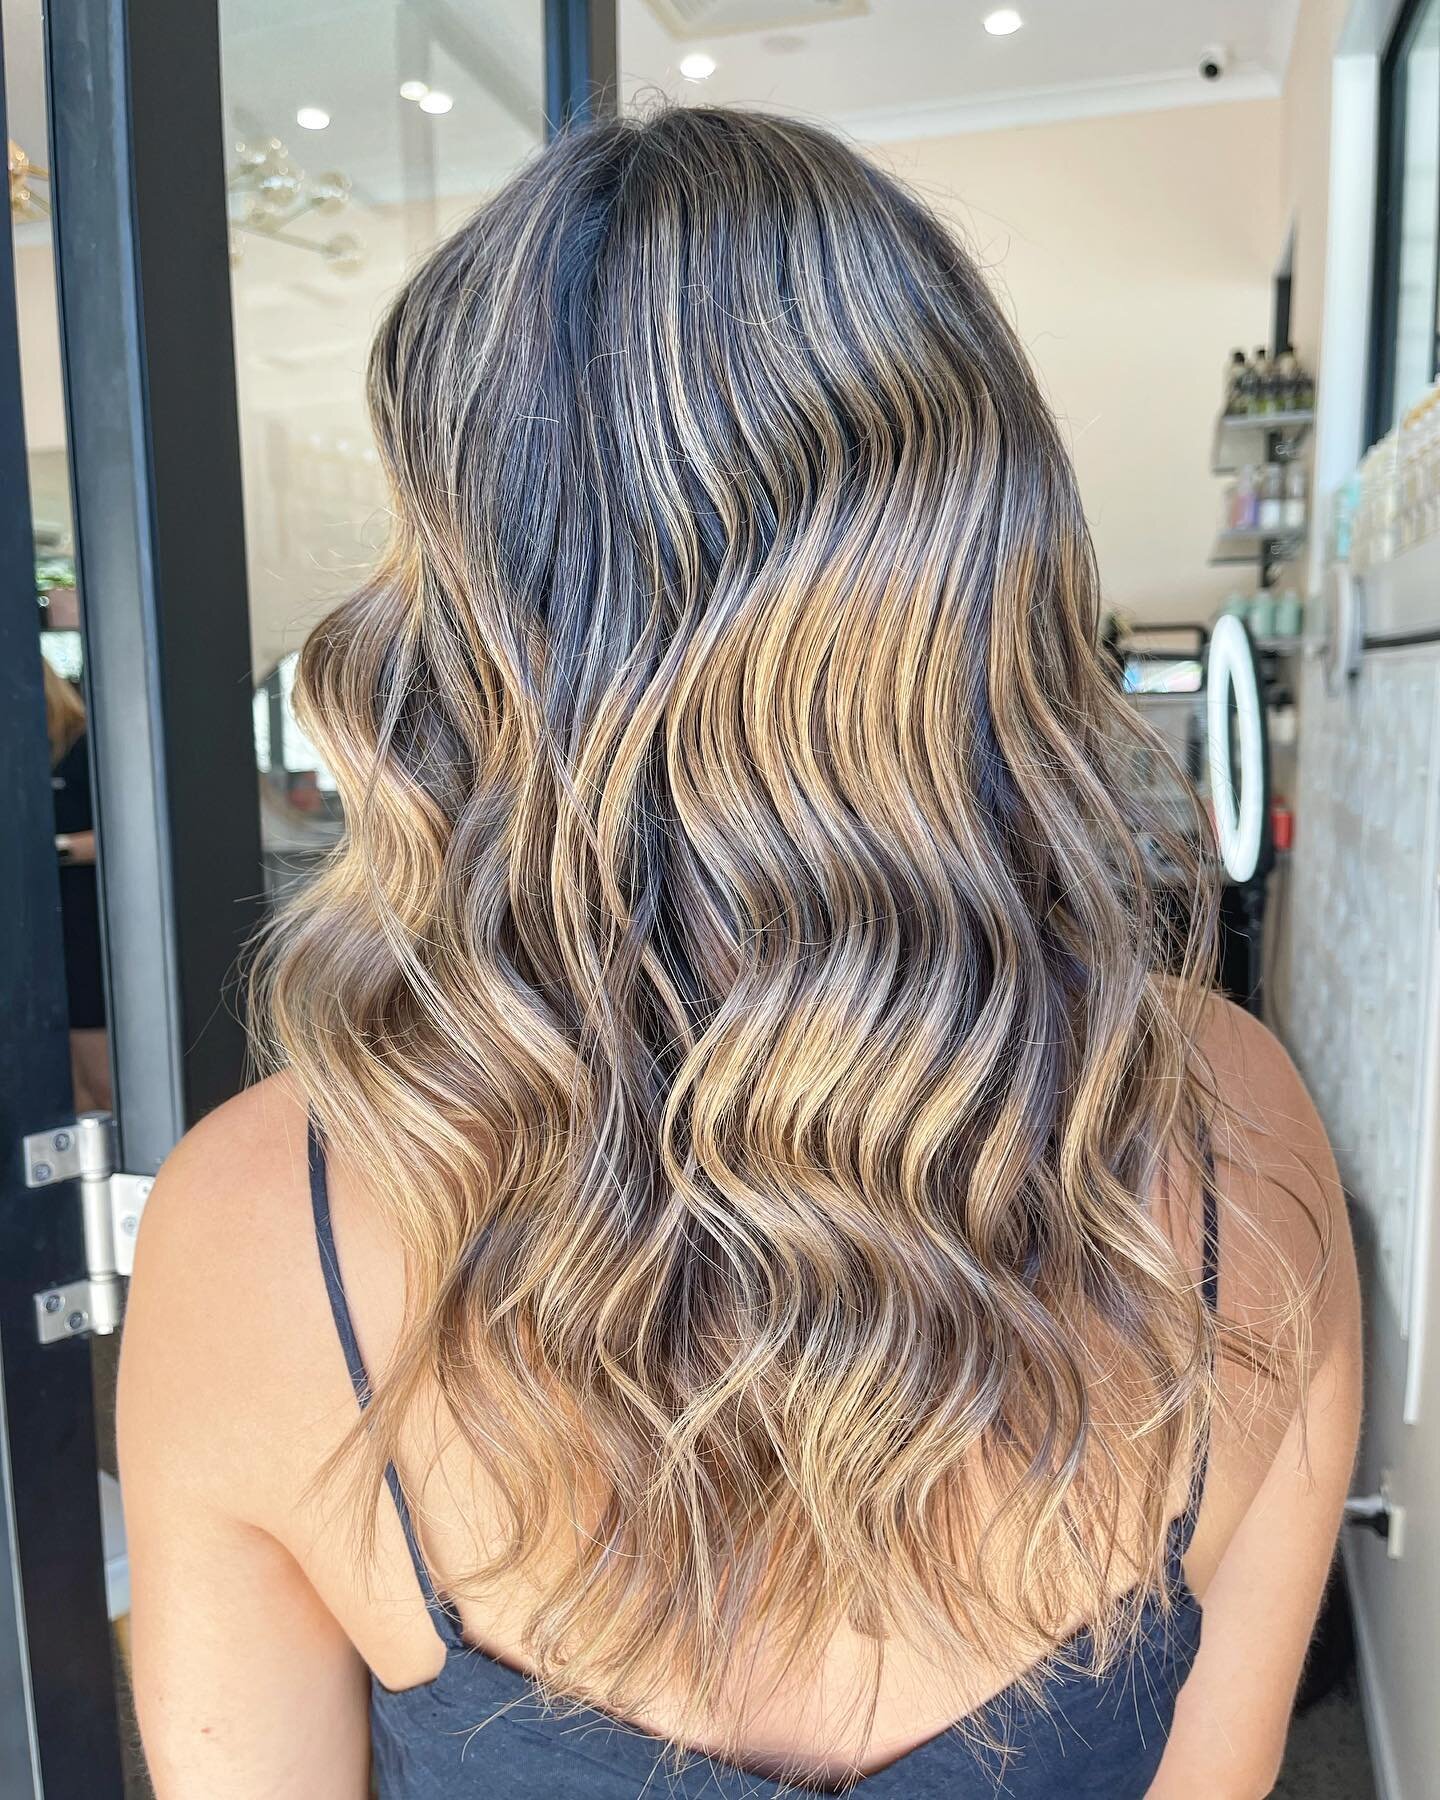 Bronzed blonde.  Does the natural light make mirror like reflections on your hair? Check out this gloss up 🤤
.
.
.
.
#bronde #balayage #glossup #shiny #artdeco